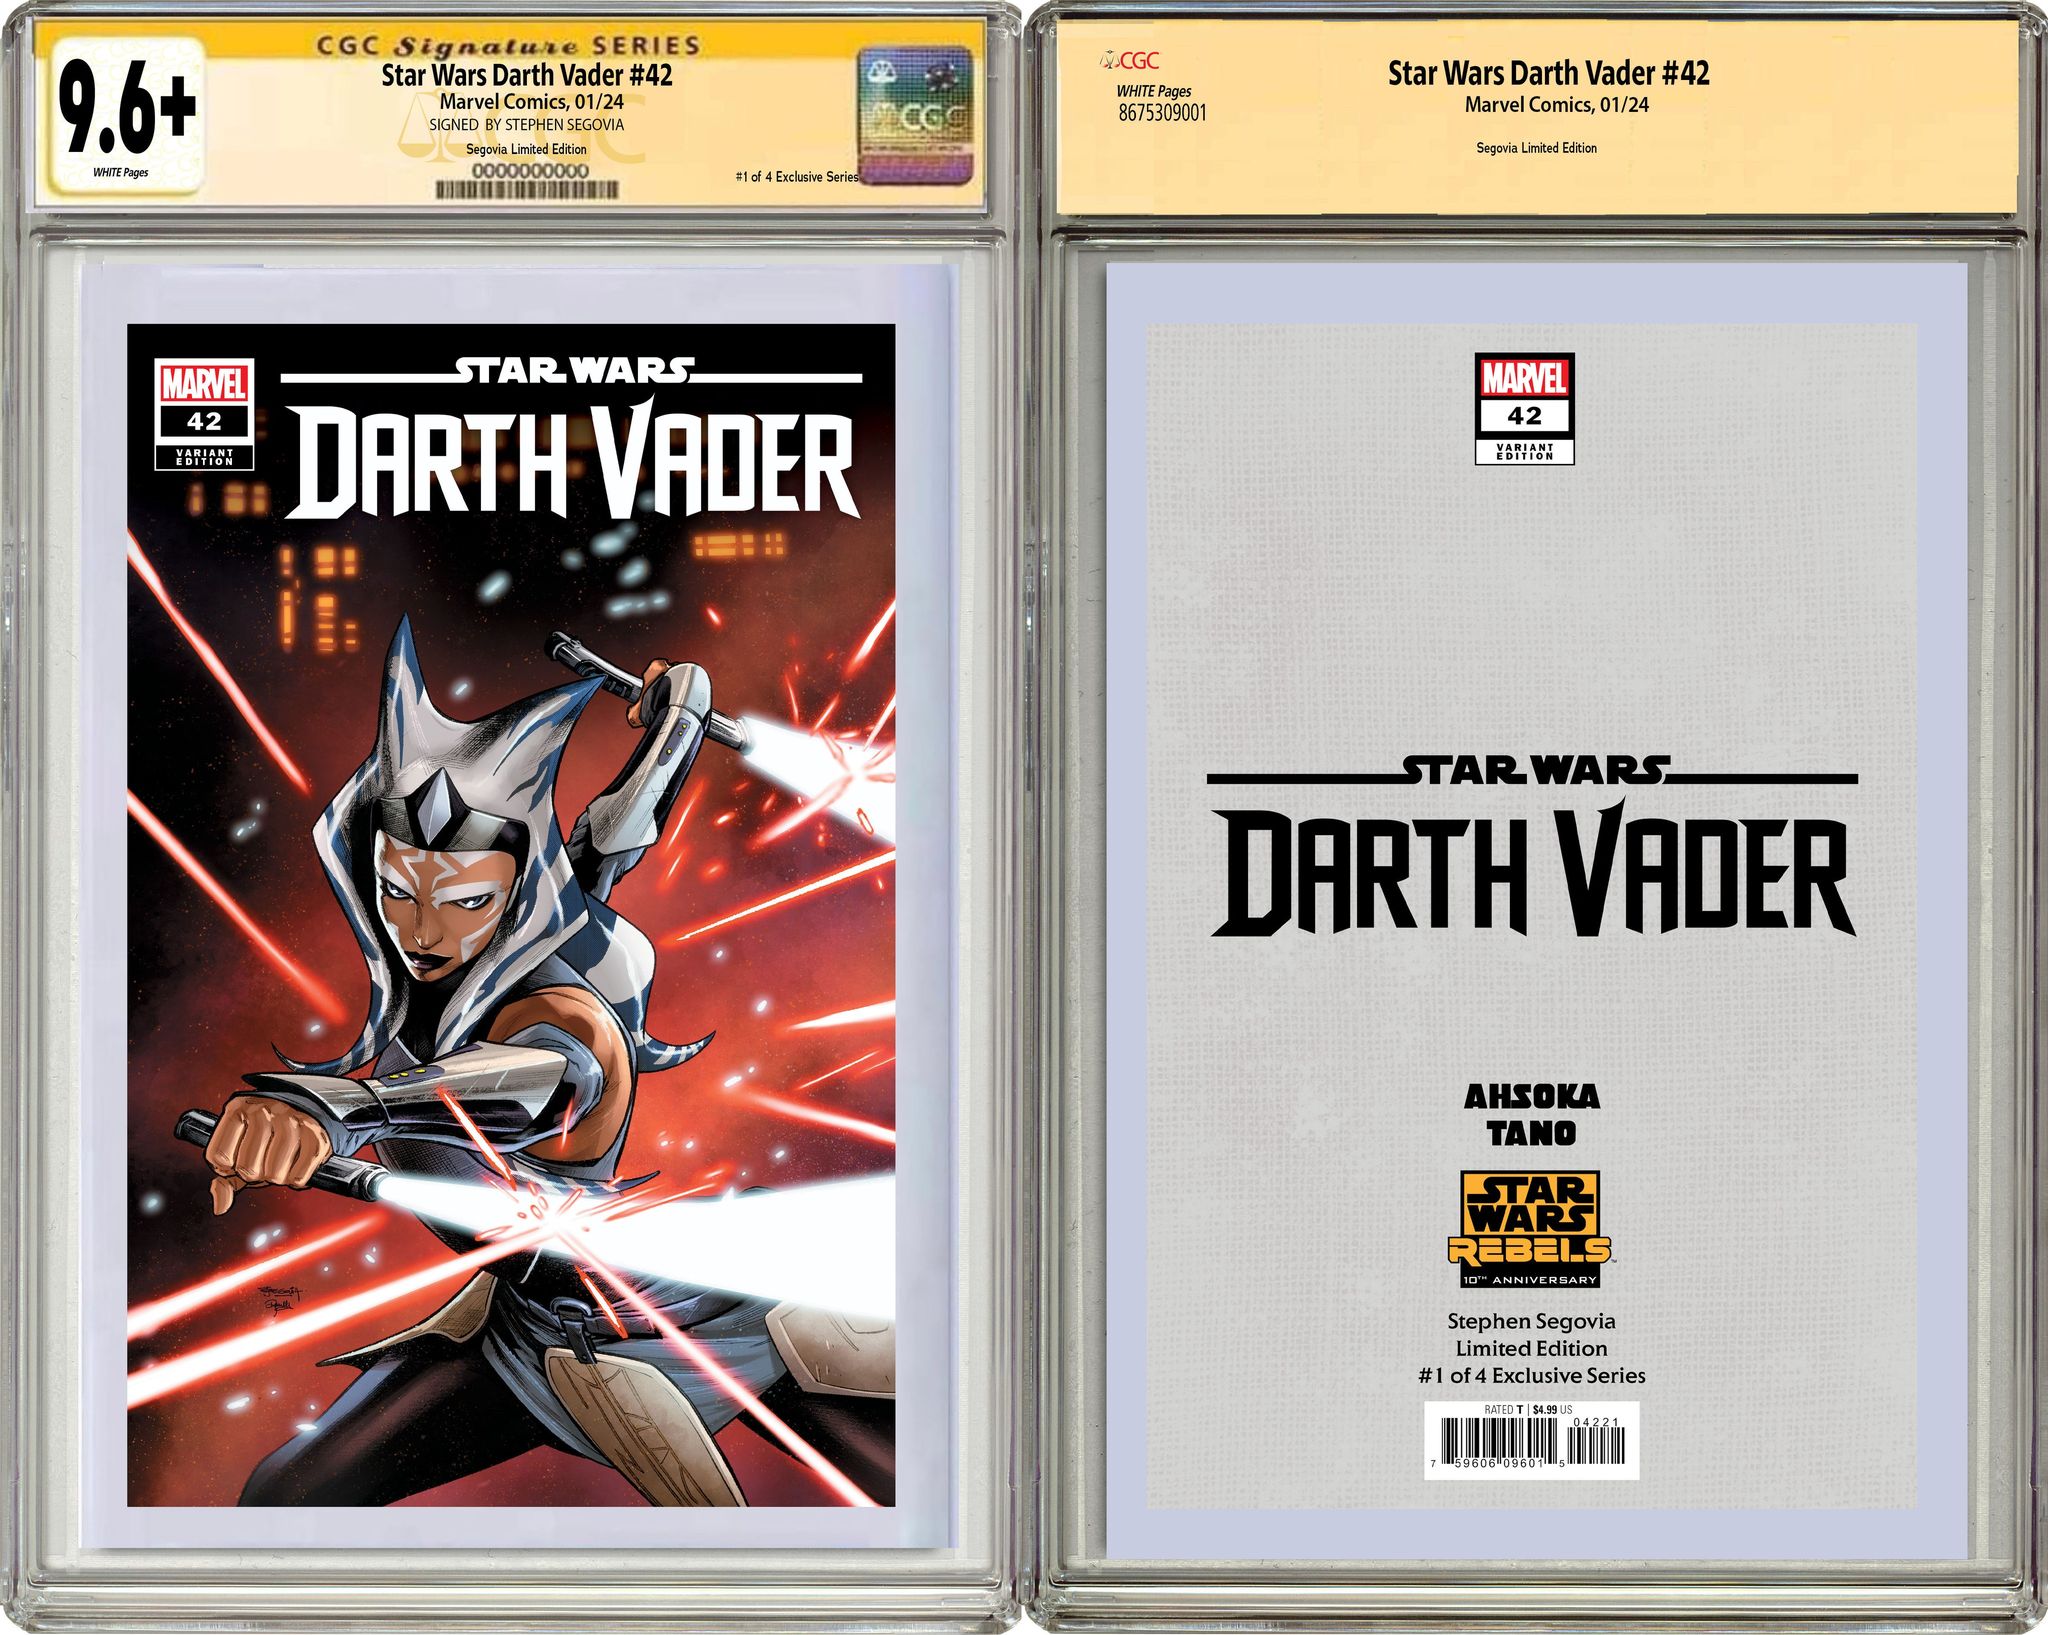 STAR WARS: DARTH VADER 42 STEPHEN SEGOVIA REBELS 10TH ANNIVERSARY LIMITED EDITION #1 OF 4 EXCLUSIVE SERIES OPTIONS- 01/03/24